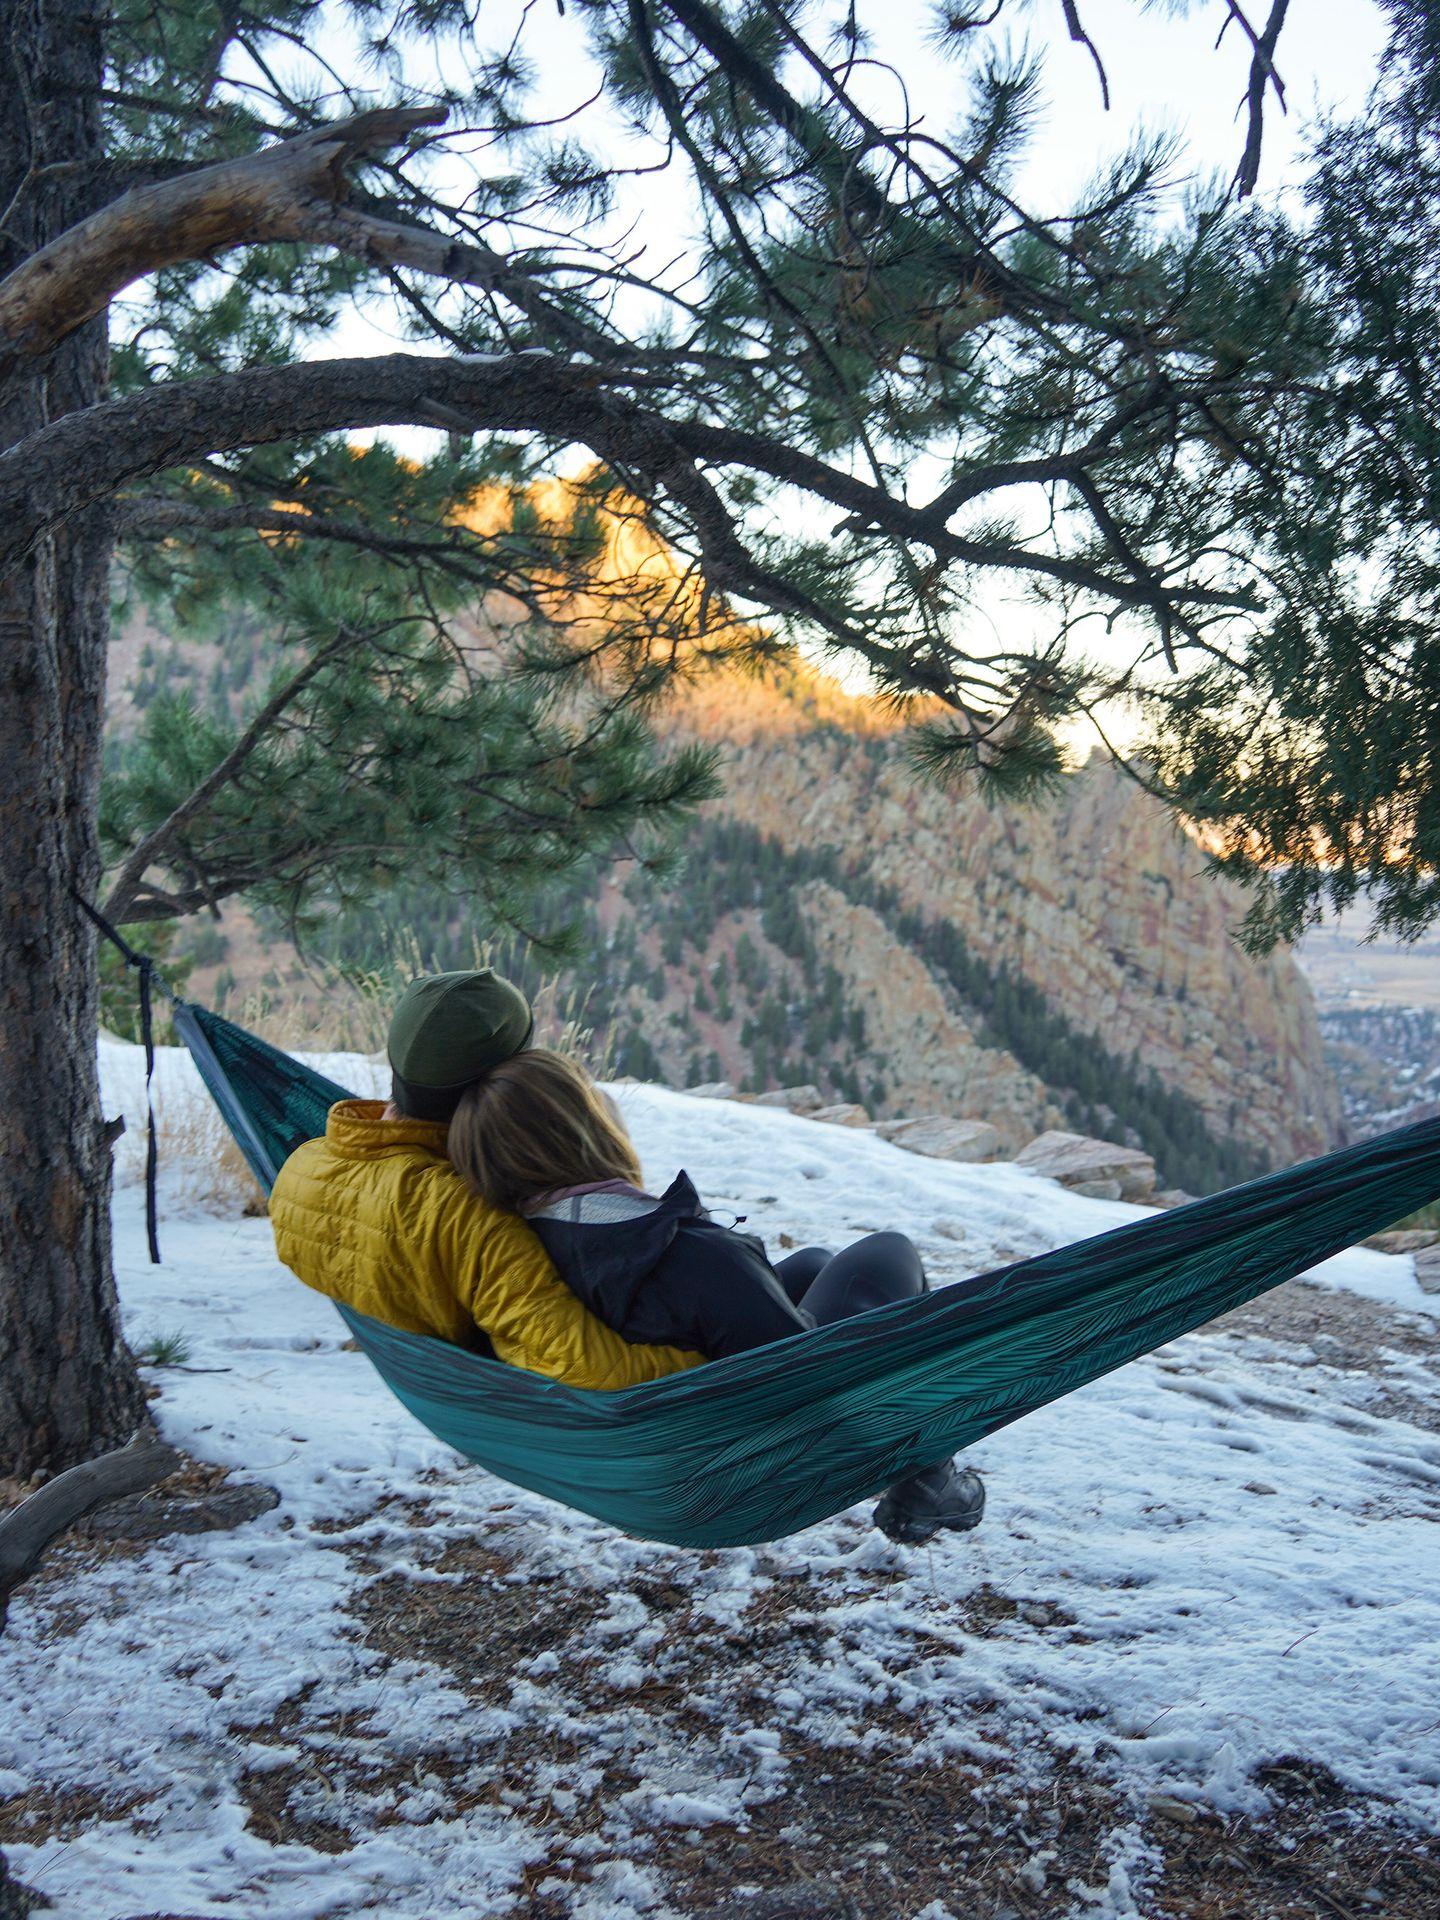 Lydia and her husband sitting on an hammock admiring a view. There is snow on the ground